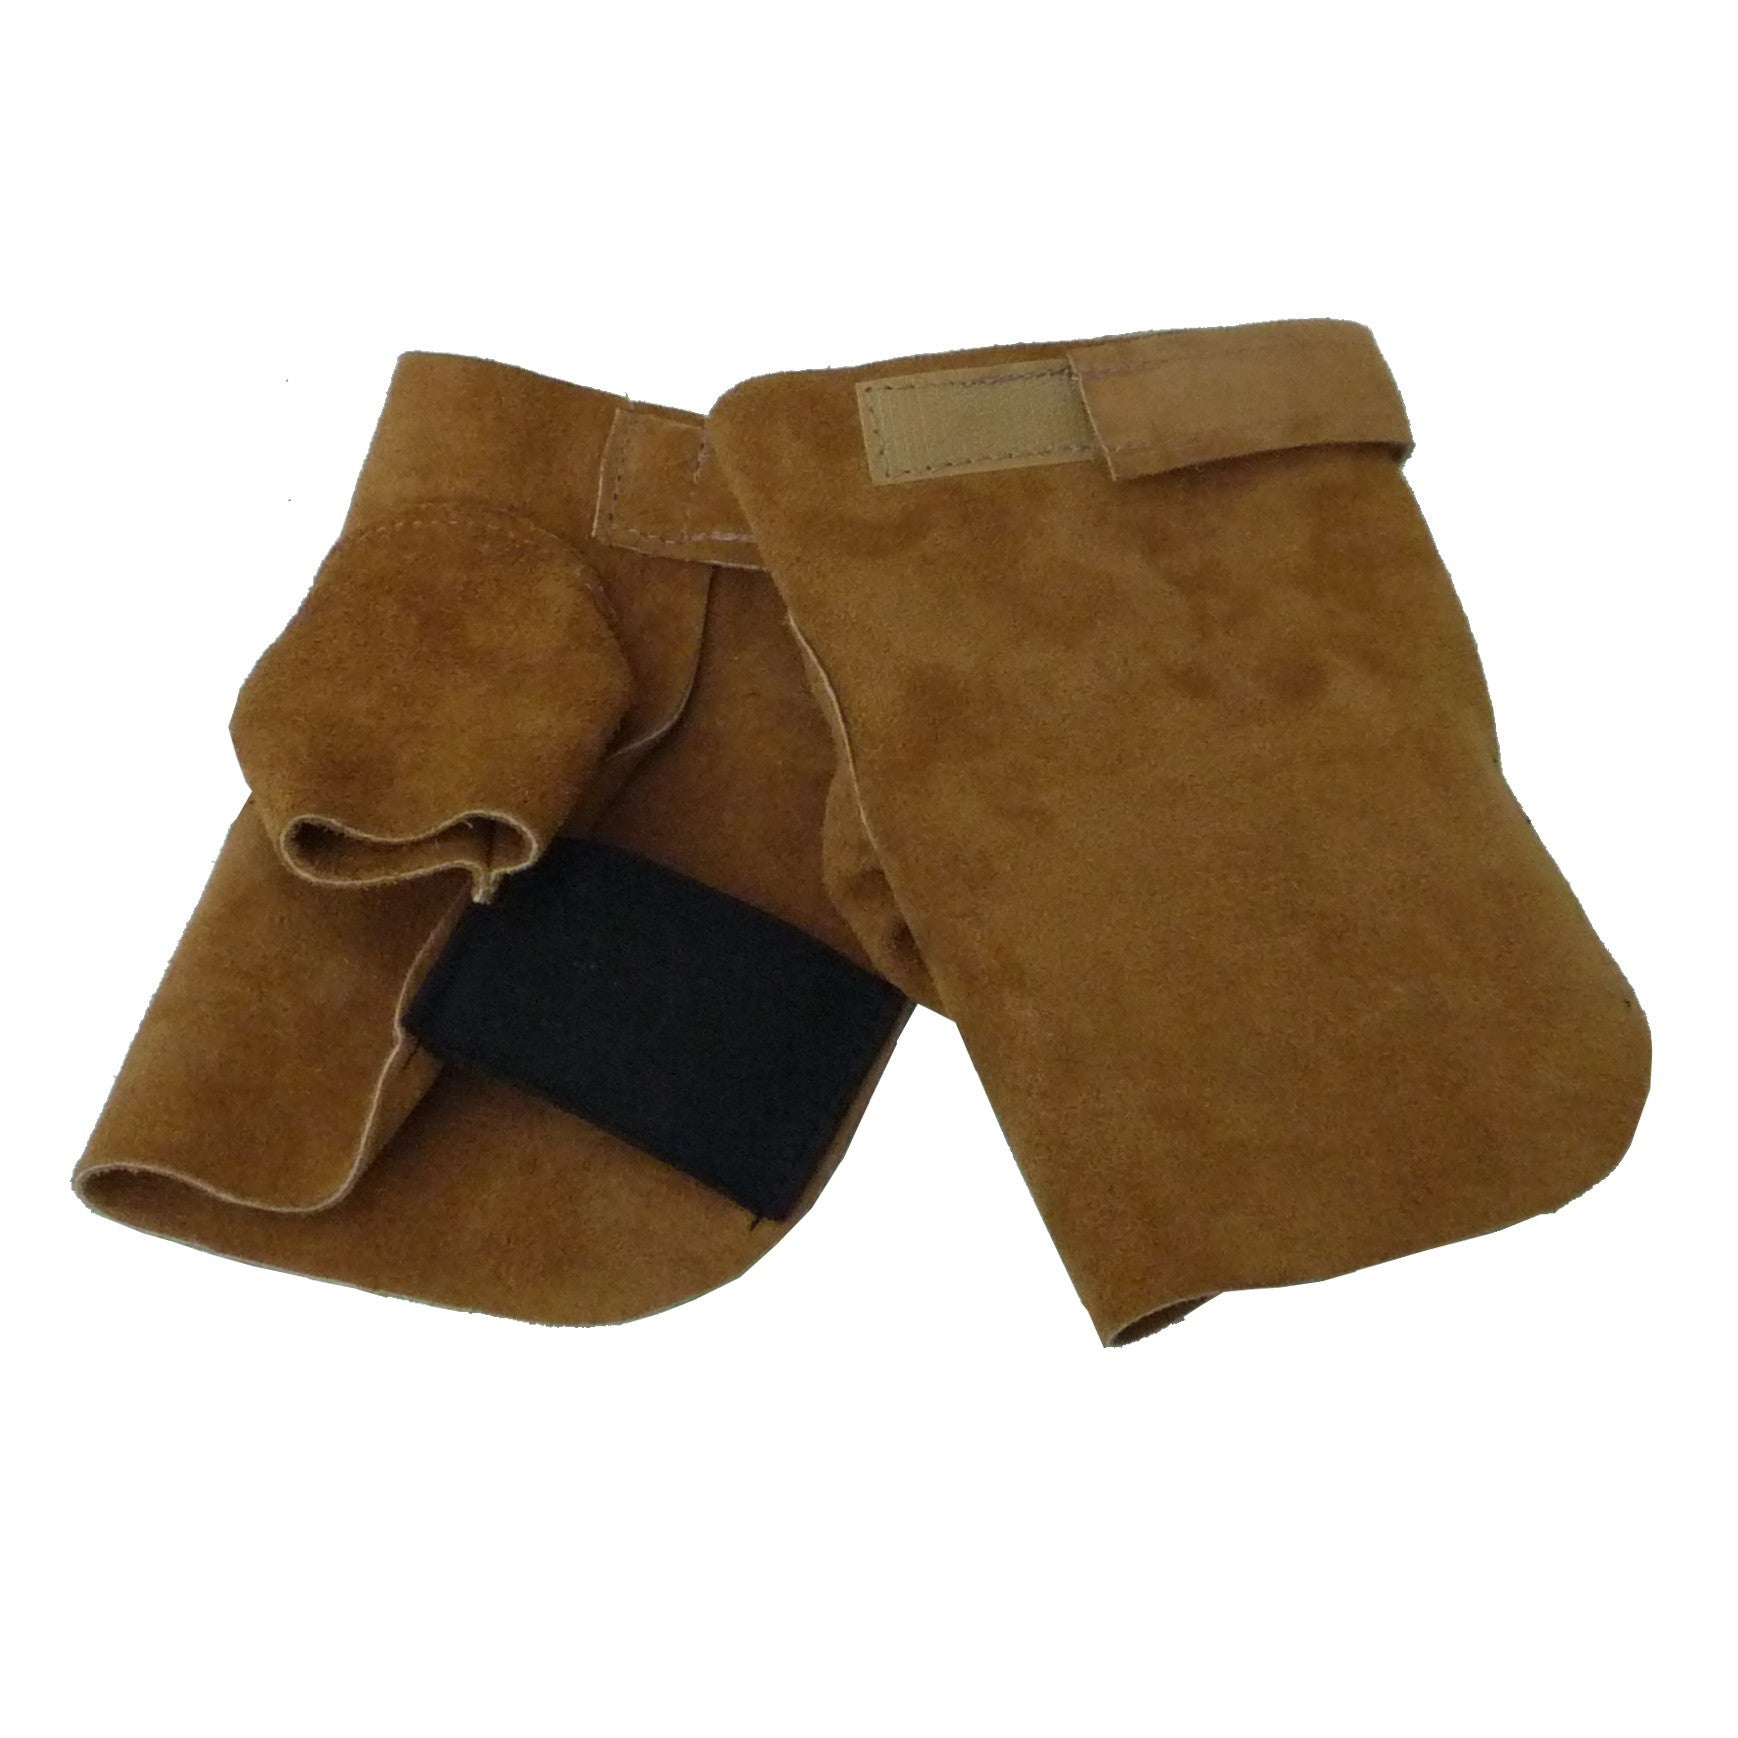 Leather Mitt palm Protectors. Made in Canada by Egli's Sheep Farm